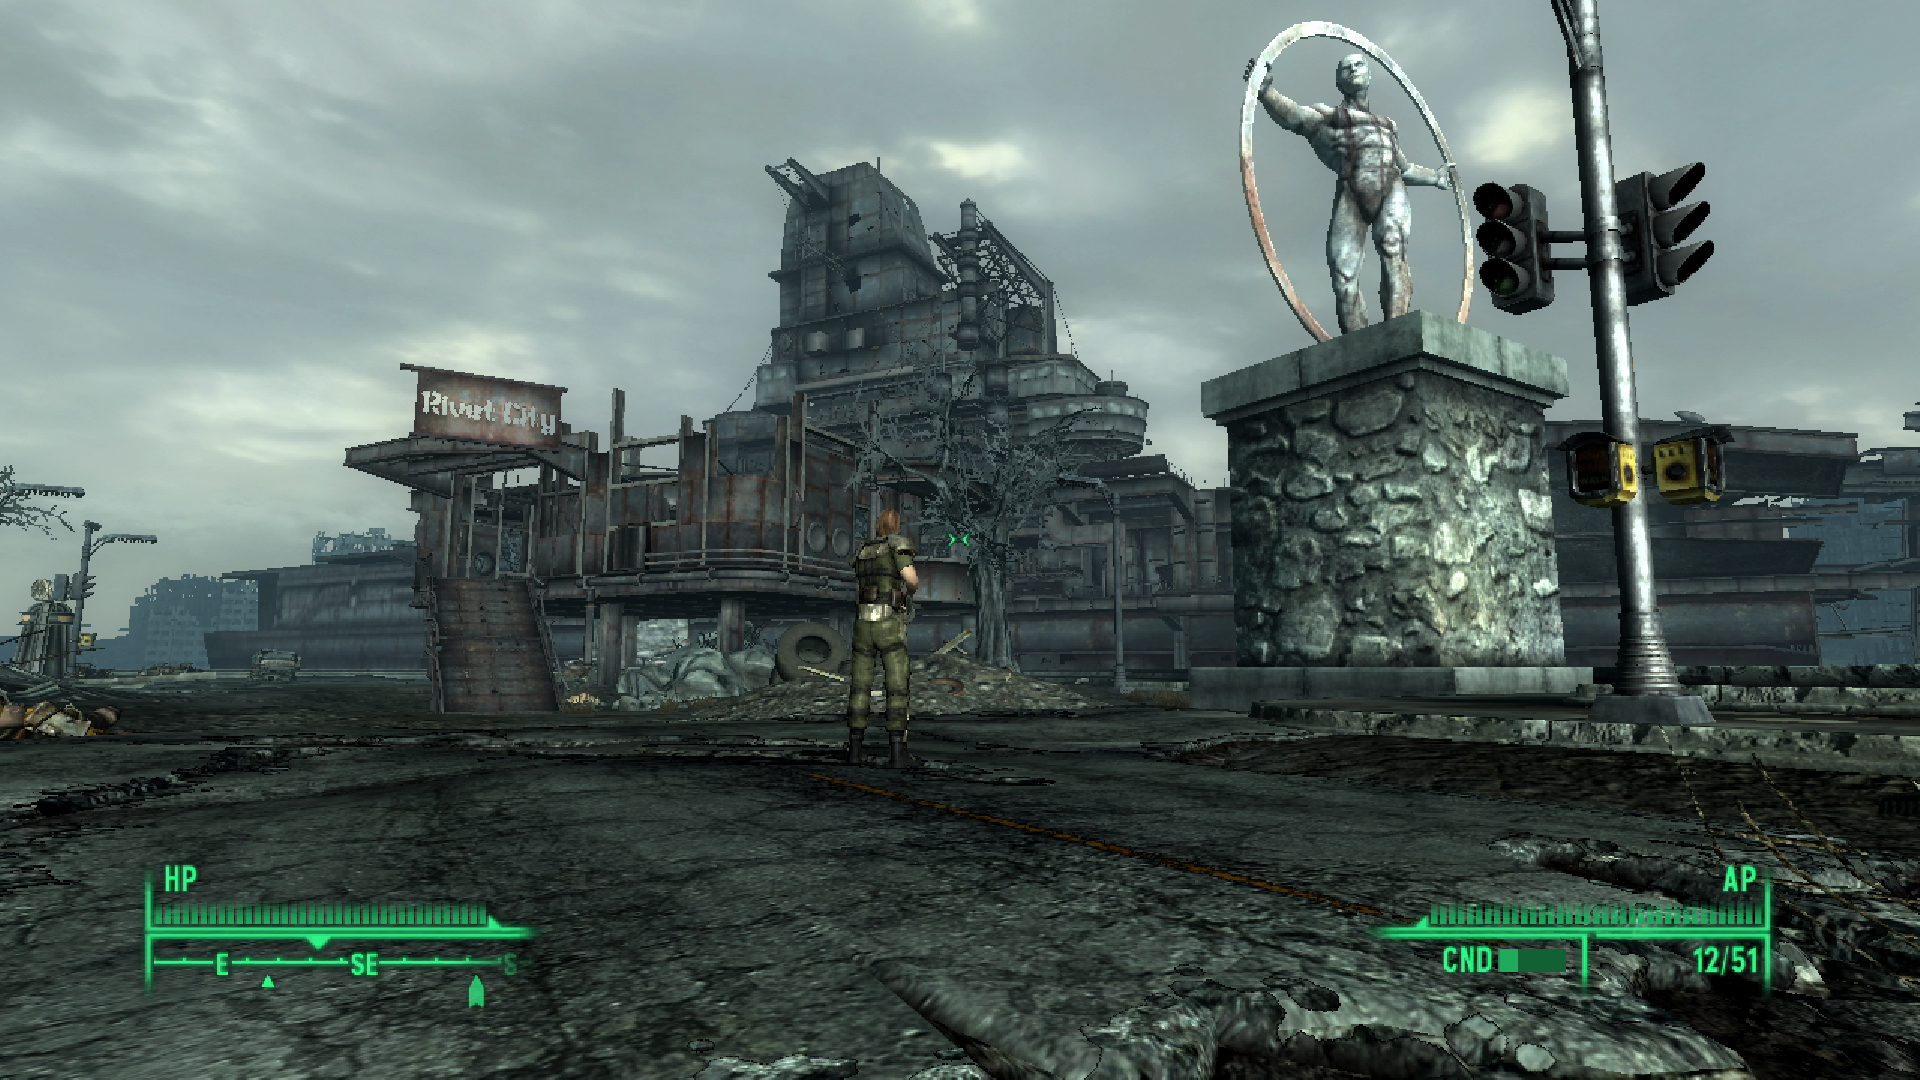 amazon, prime video’s ‘fallout’ series got me back into ‘fallout 3’ on ps3, and it’s like i never left